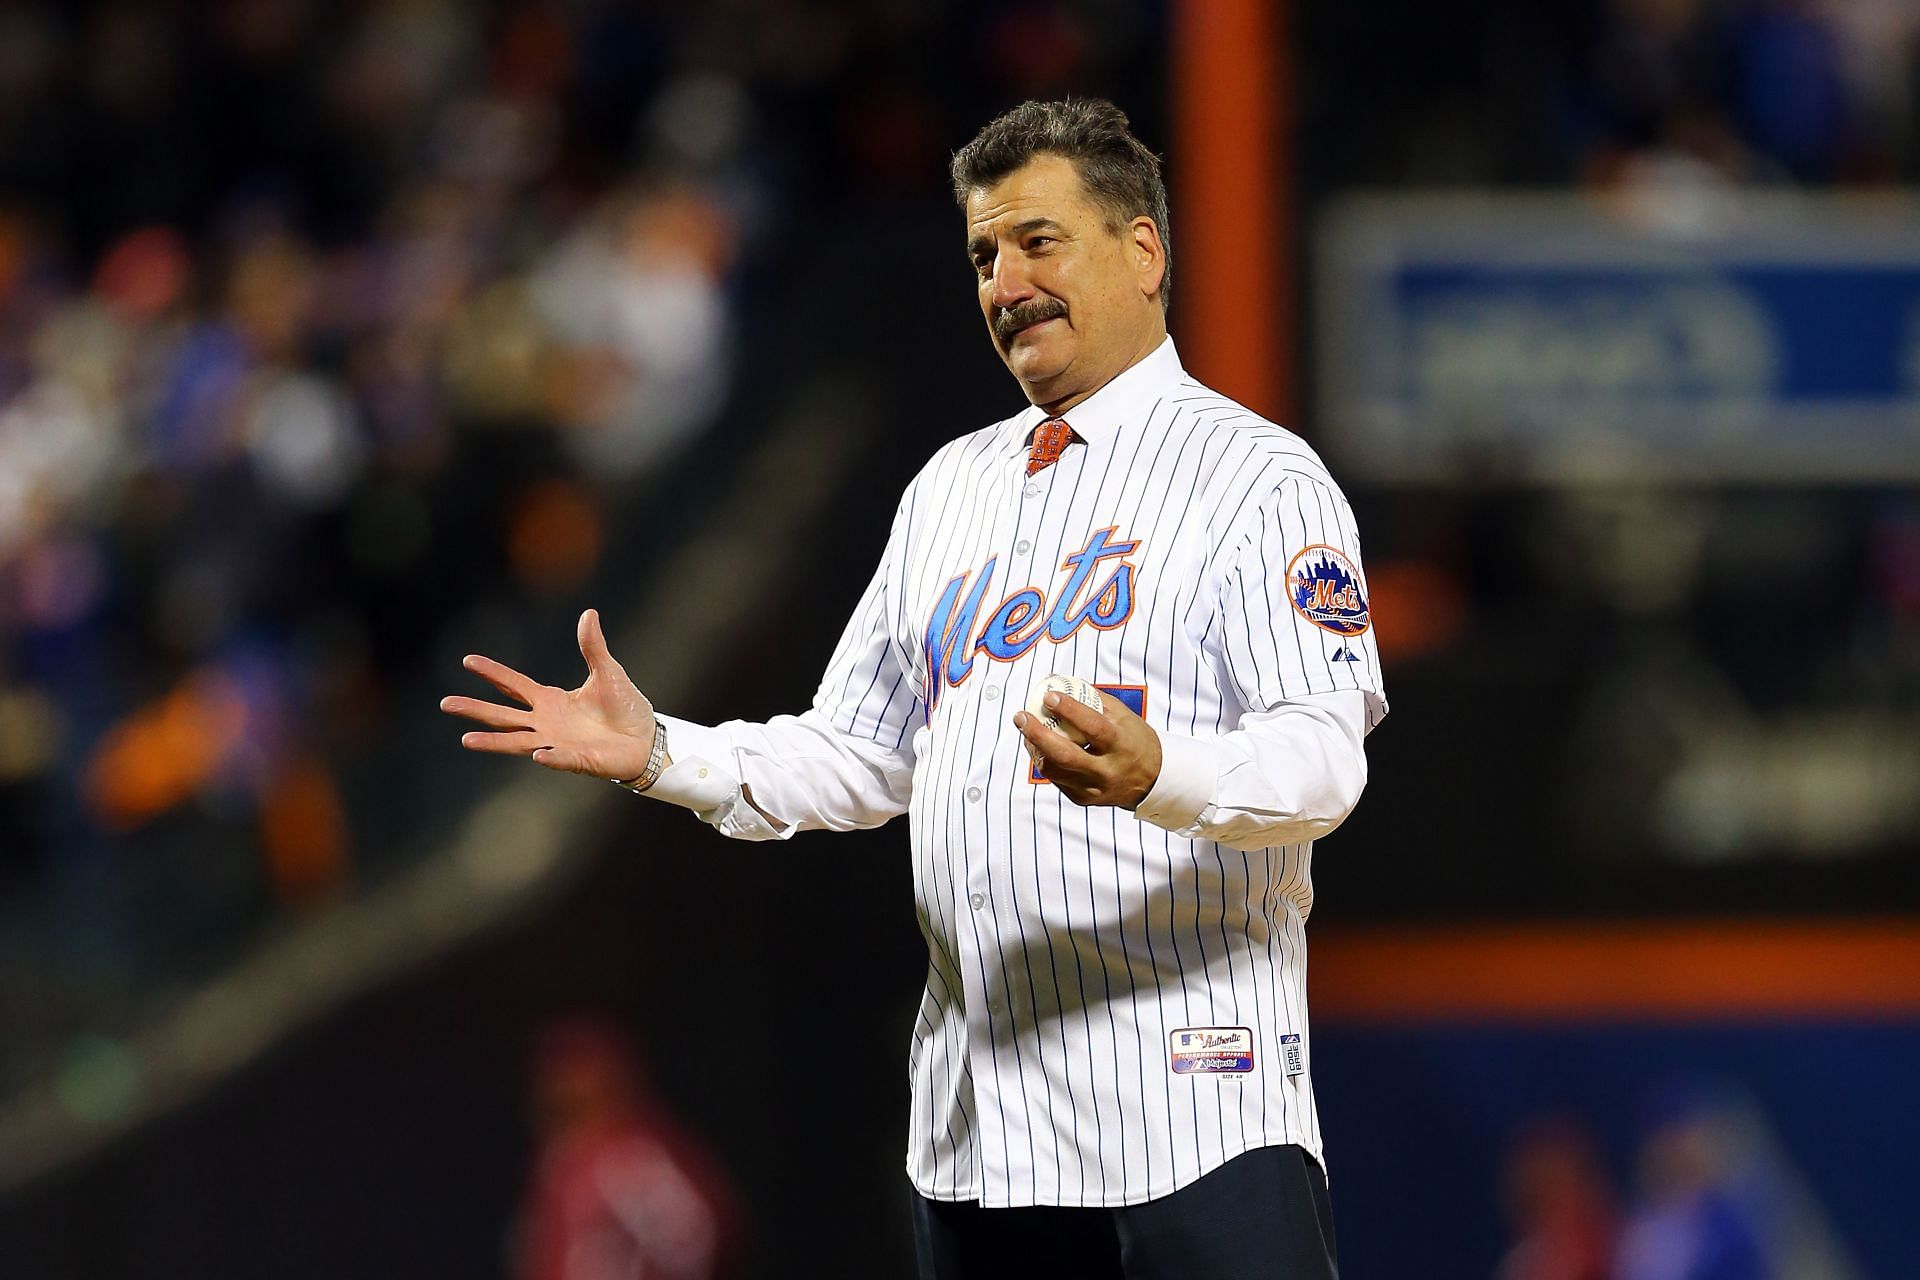 When former New York Mets star Keith Hernandez candidly spoke